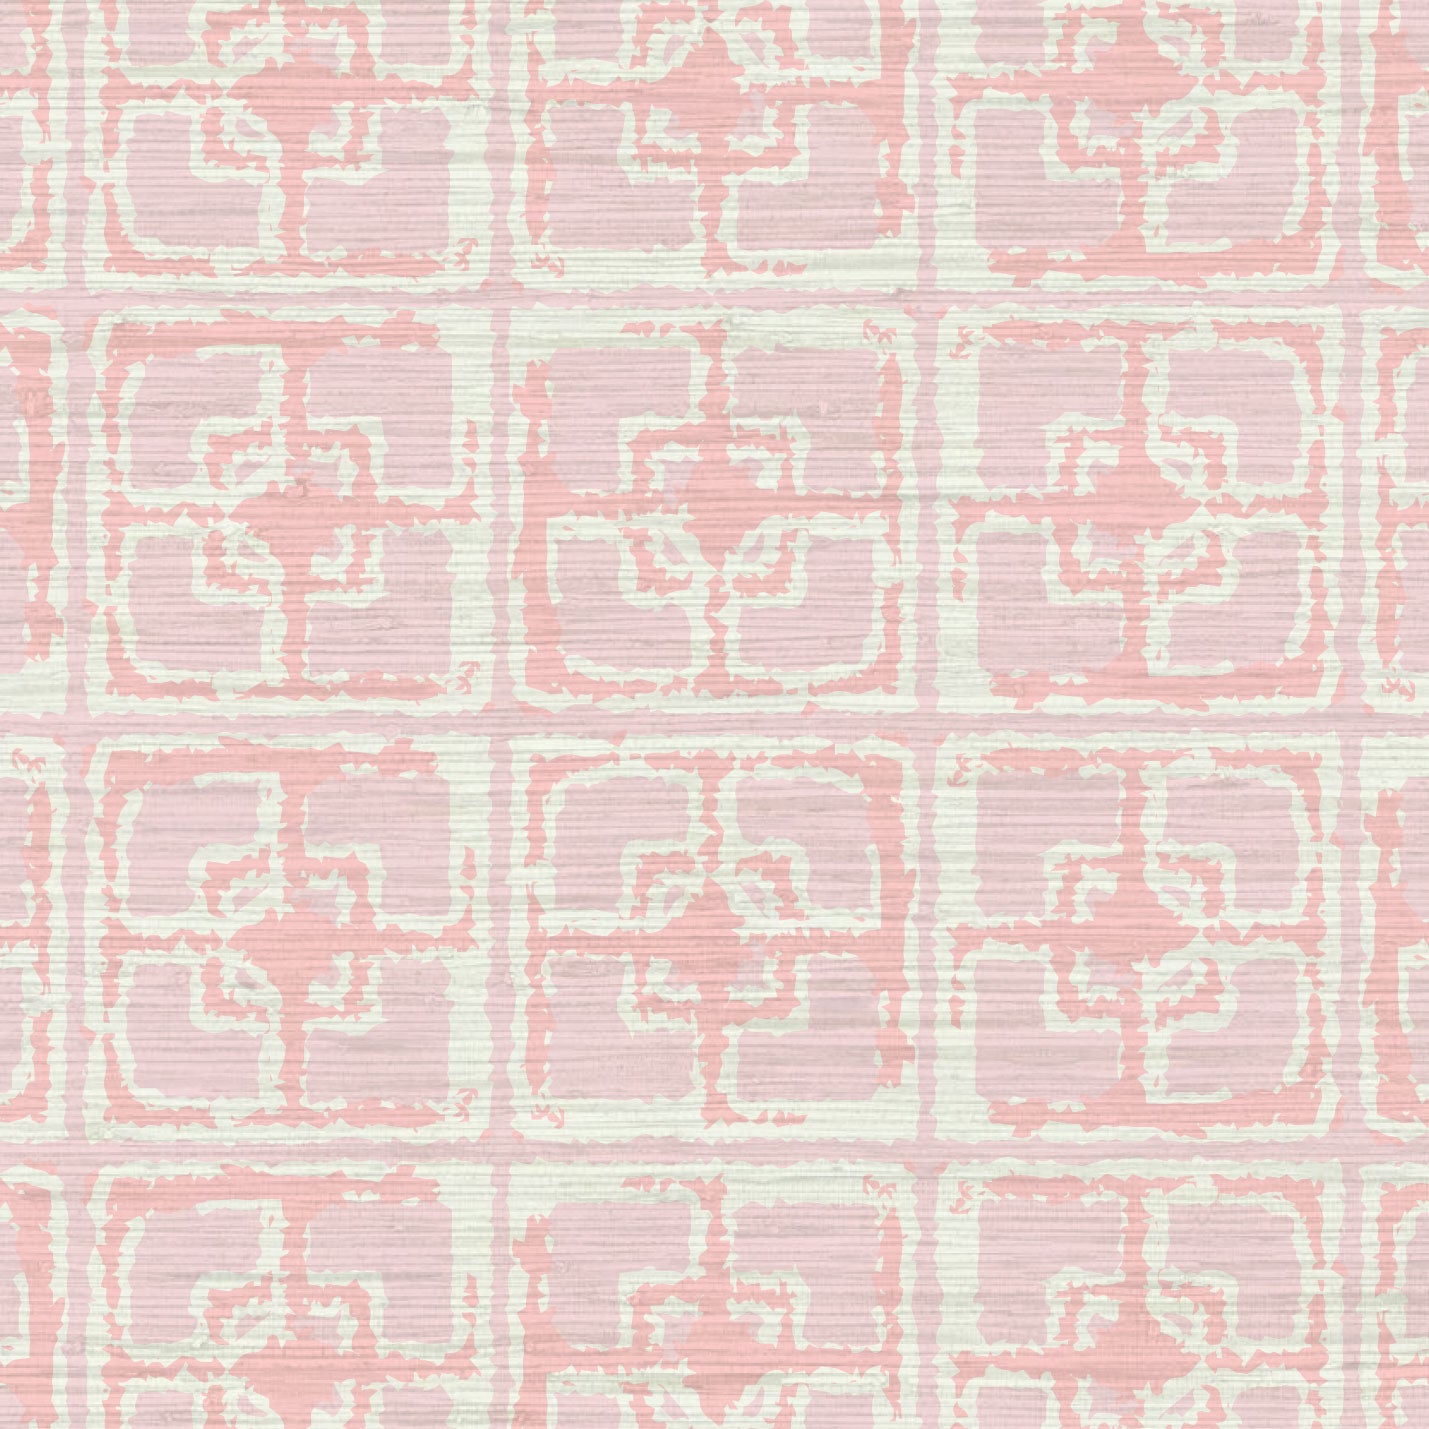 Grasscloth wallpaper Natural Textured Eco-Friendly Non-toxic High-quality Sustainable Interior Design Bold Custom Tailor-made Retro chic Grand millennial Maximalism Traditional Dopamine decor Tropical Coastal Garden Seaside Seashore Waterfront Retreat Relaxed beach vibes Beach cottage Shoreline Oceanfront Nautical Cabana preppy palm leaves breeze blocks pink palm beach palm springs stripes geometric light pink baby girls mid-century